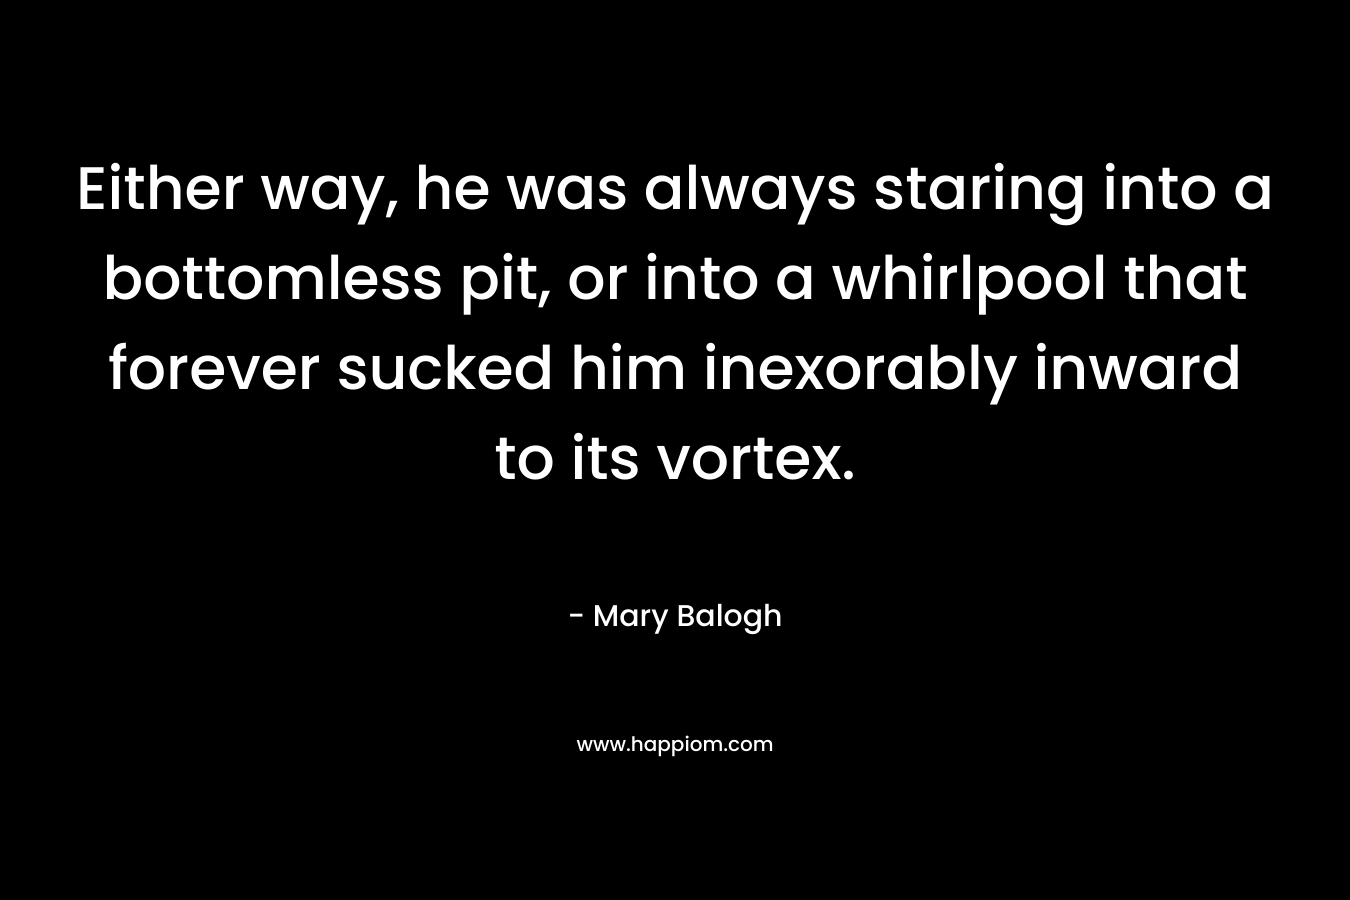 Either way, he was always staring into a bottomless pit, or into a whirlpool that forever sucked him inexorably inward to its vortex. – Mary Balogh